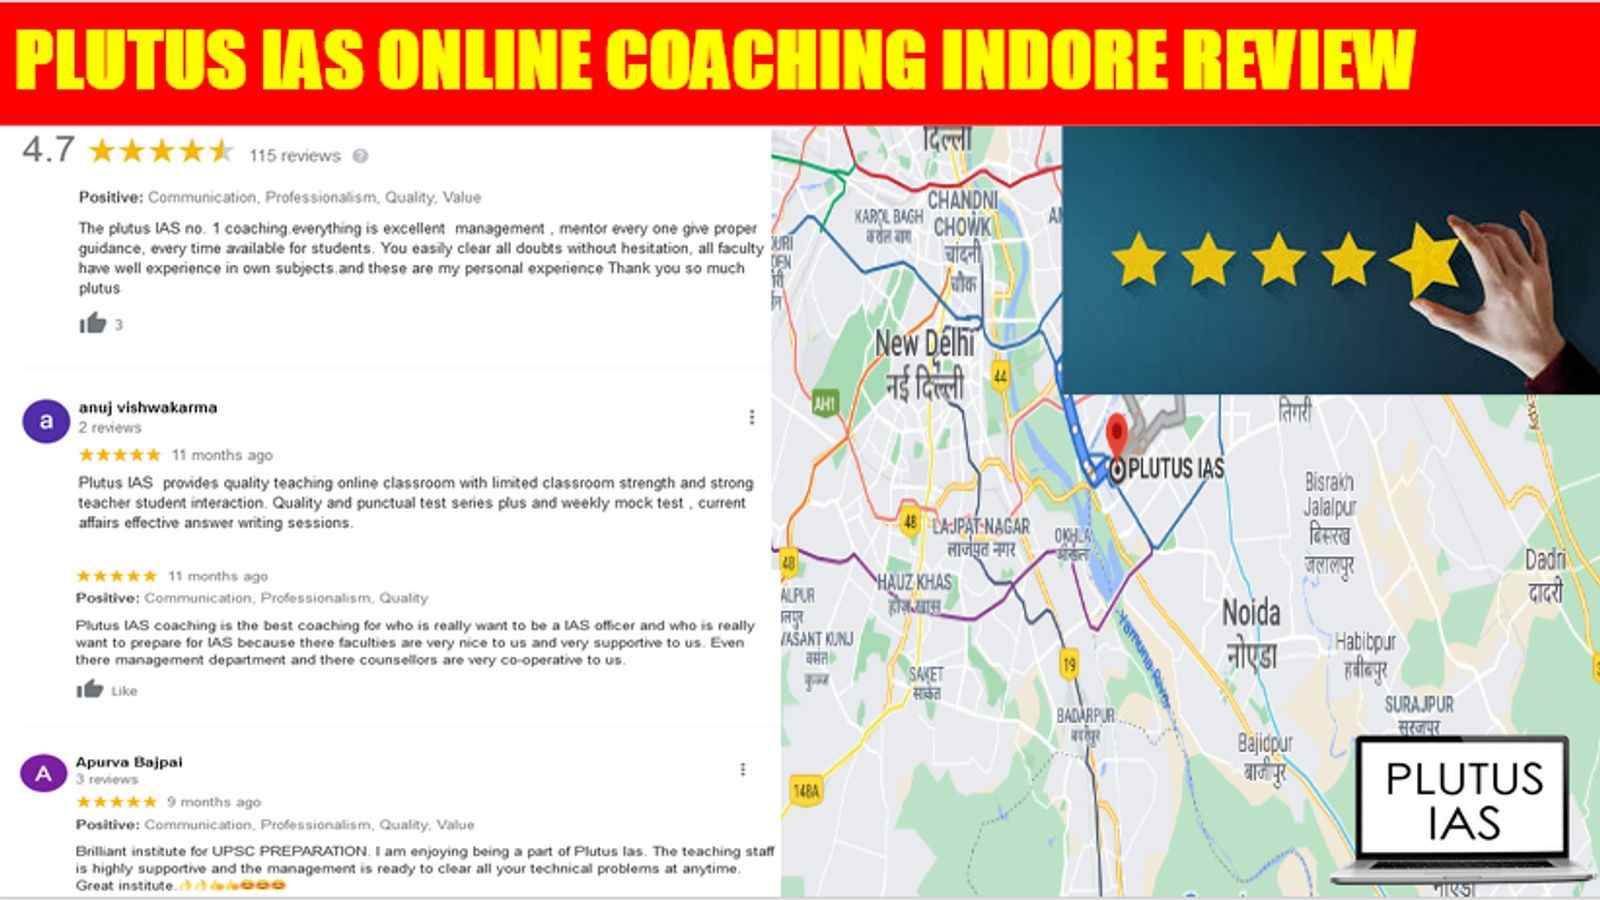 Plutus IAS Online Coaching Indore Review